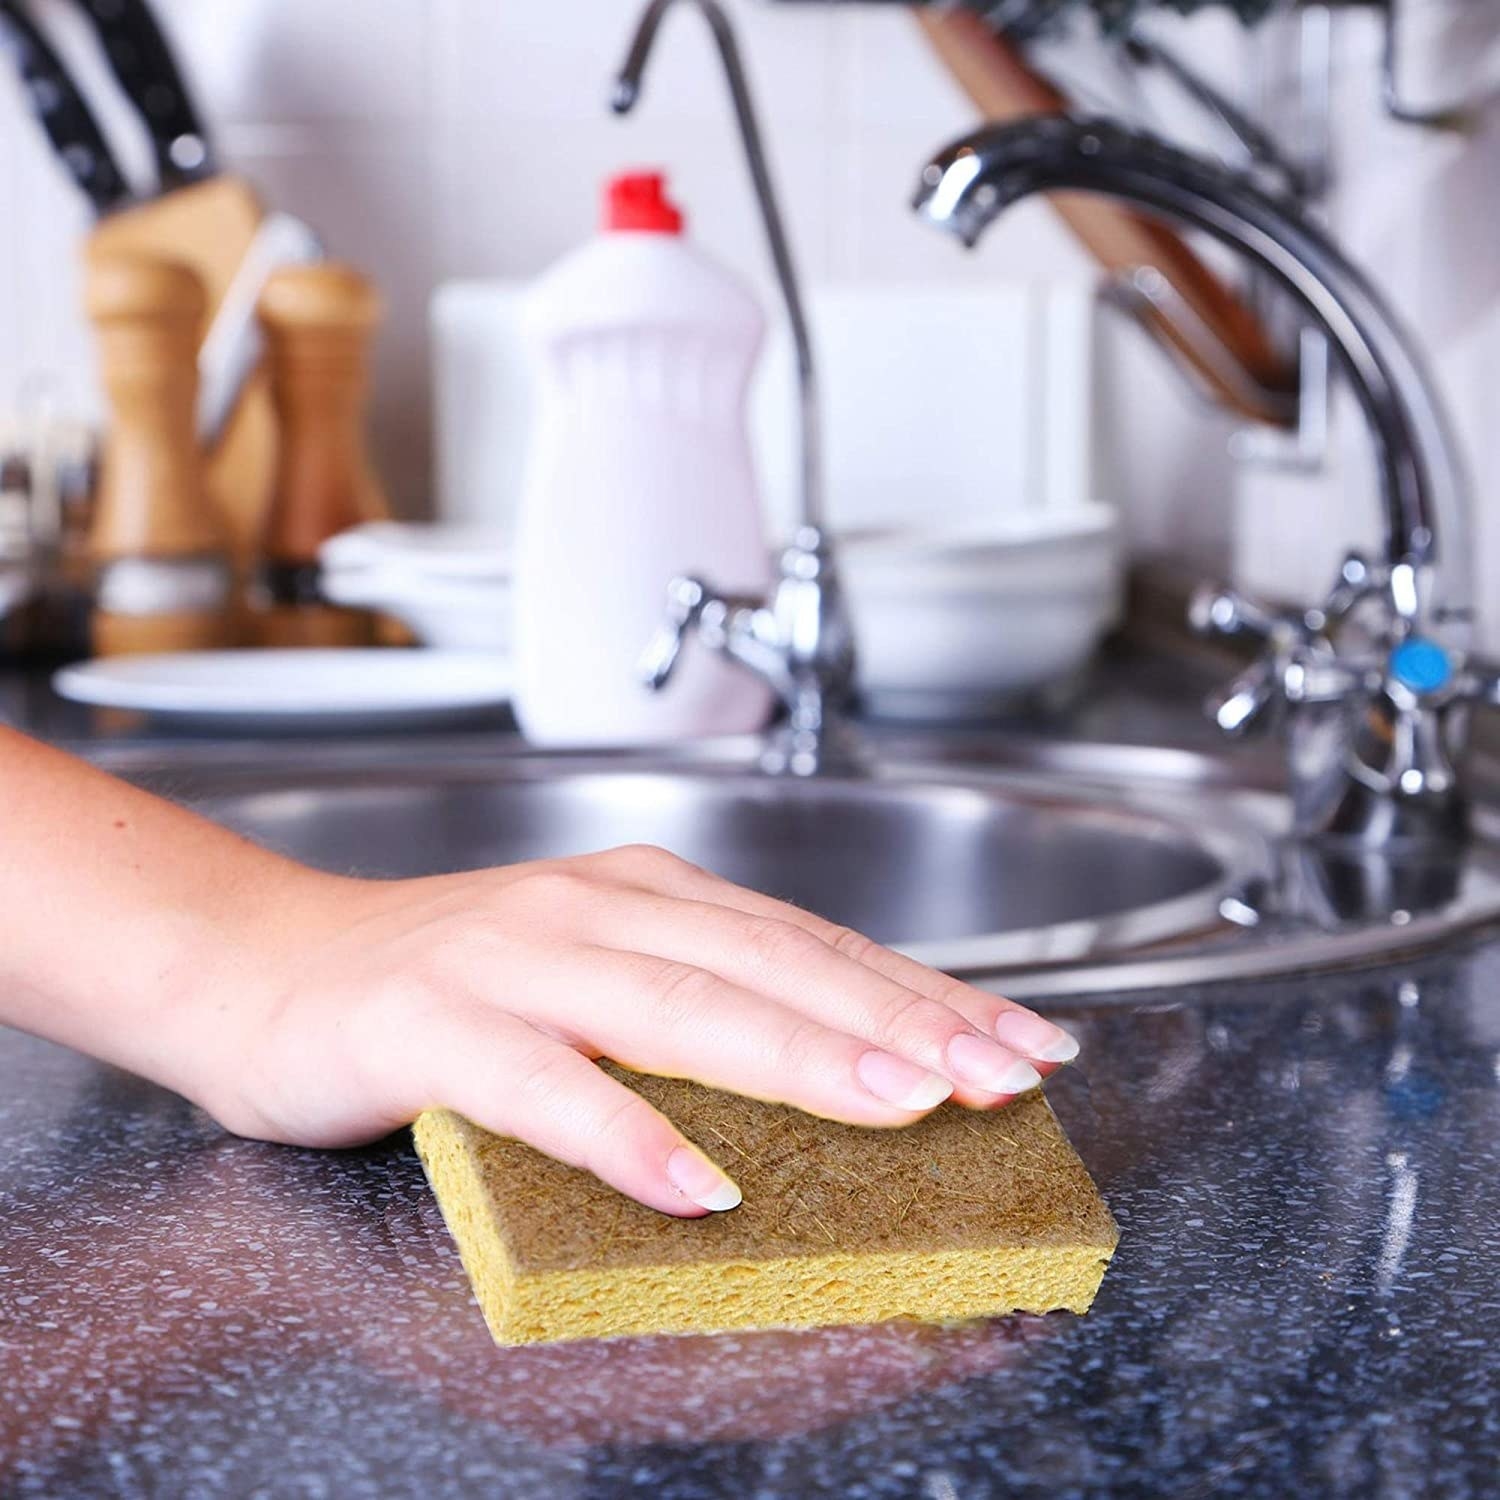 A hand holding the brown sponge while cleaning a countertop